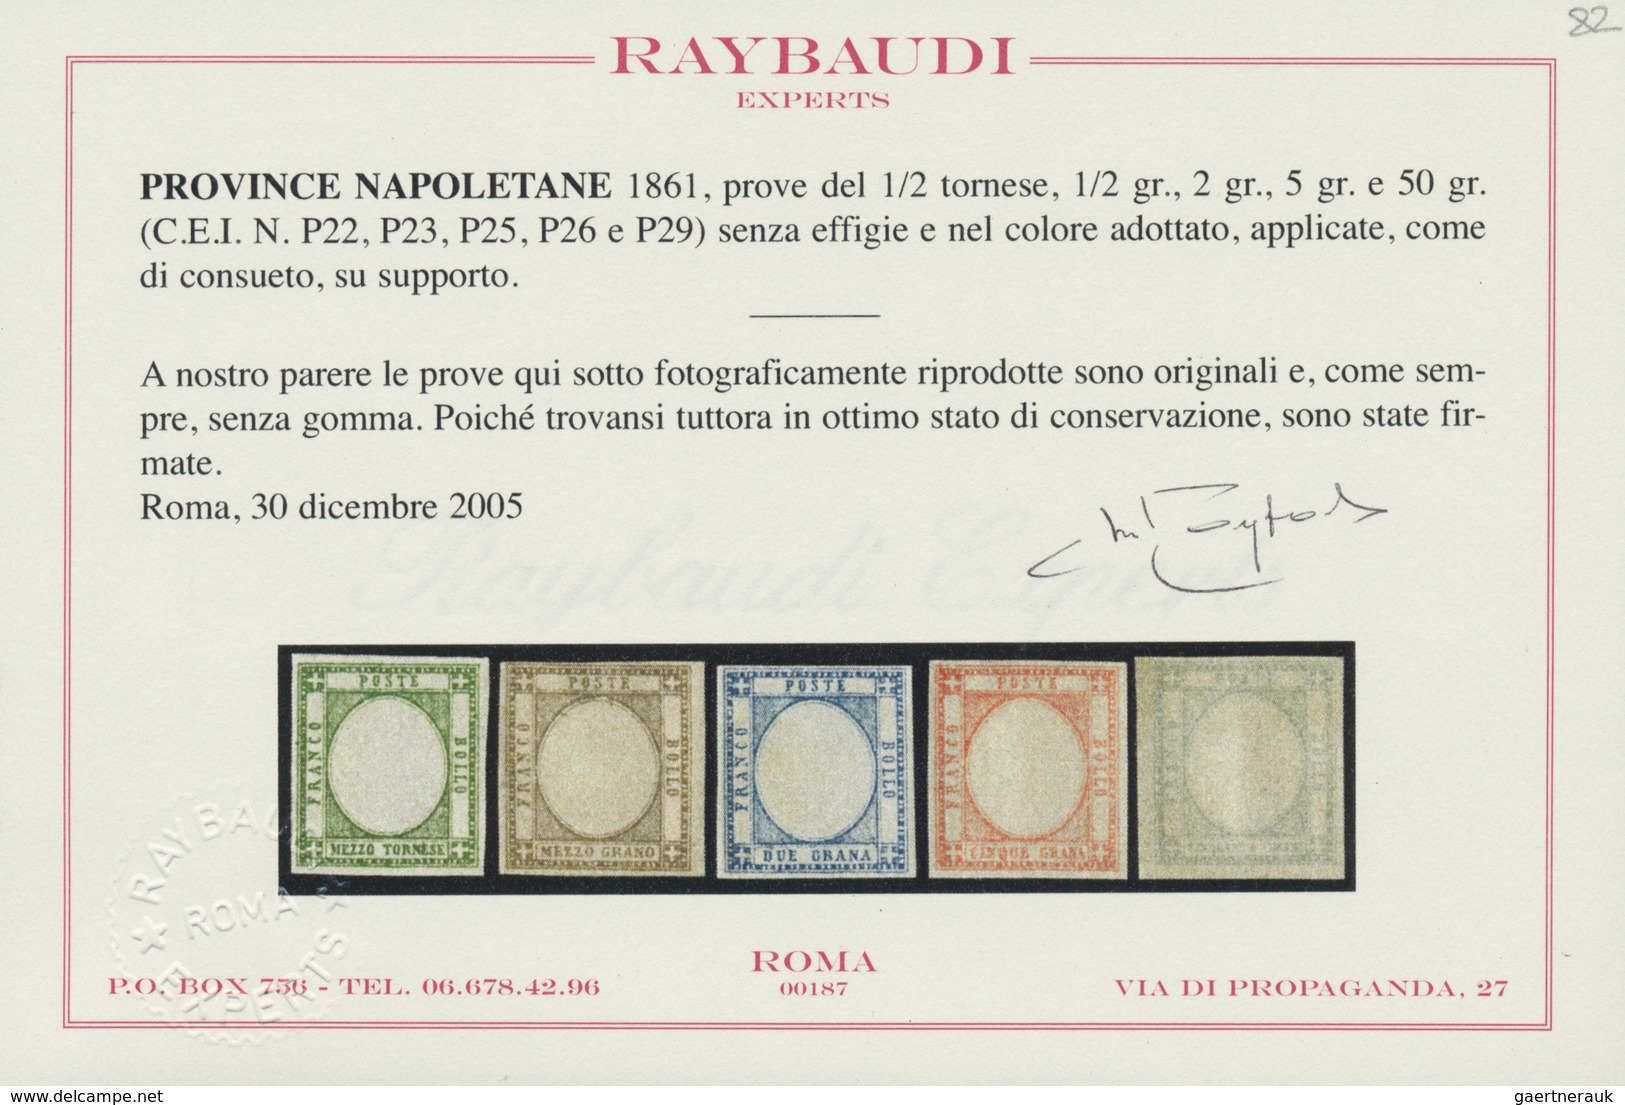 Italien: 1852-1985, AN EXCITING OFFERING OF "THE GREAT ITALY INVESTMENT STOCK" An important stock of